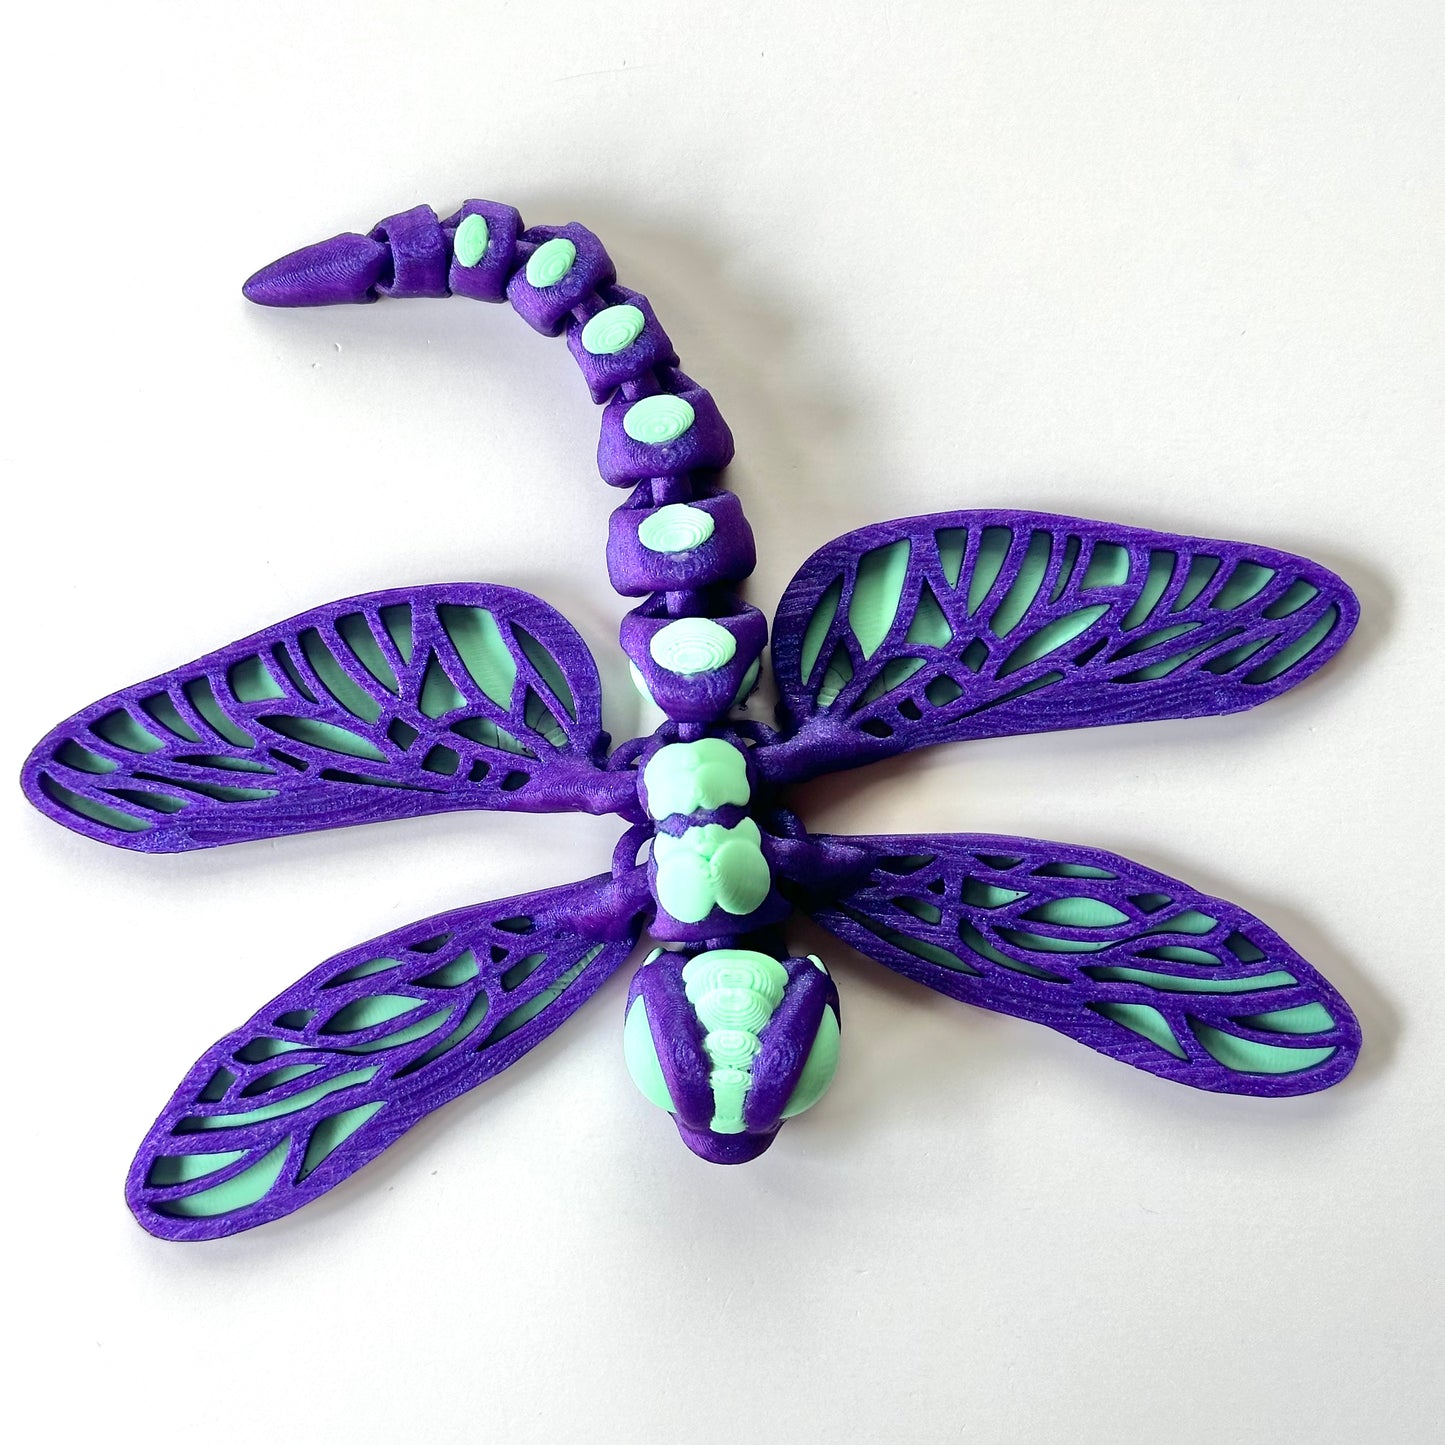 Dragonfly - 3D Printed Articulating Figure